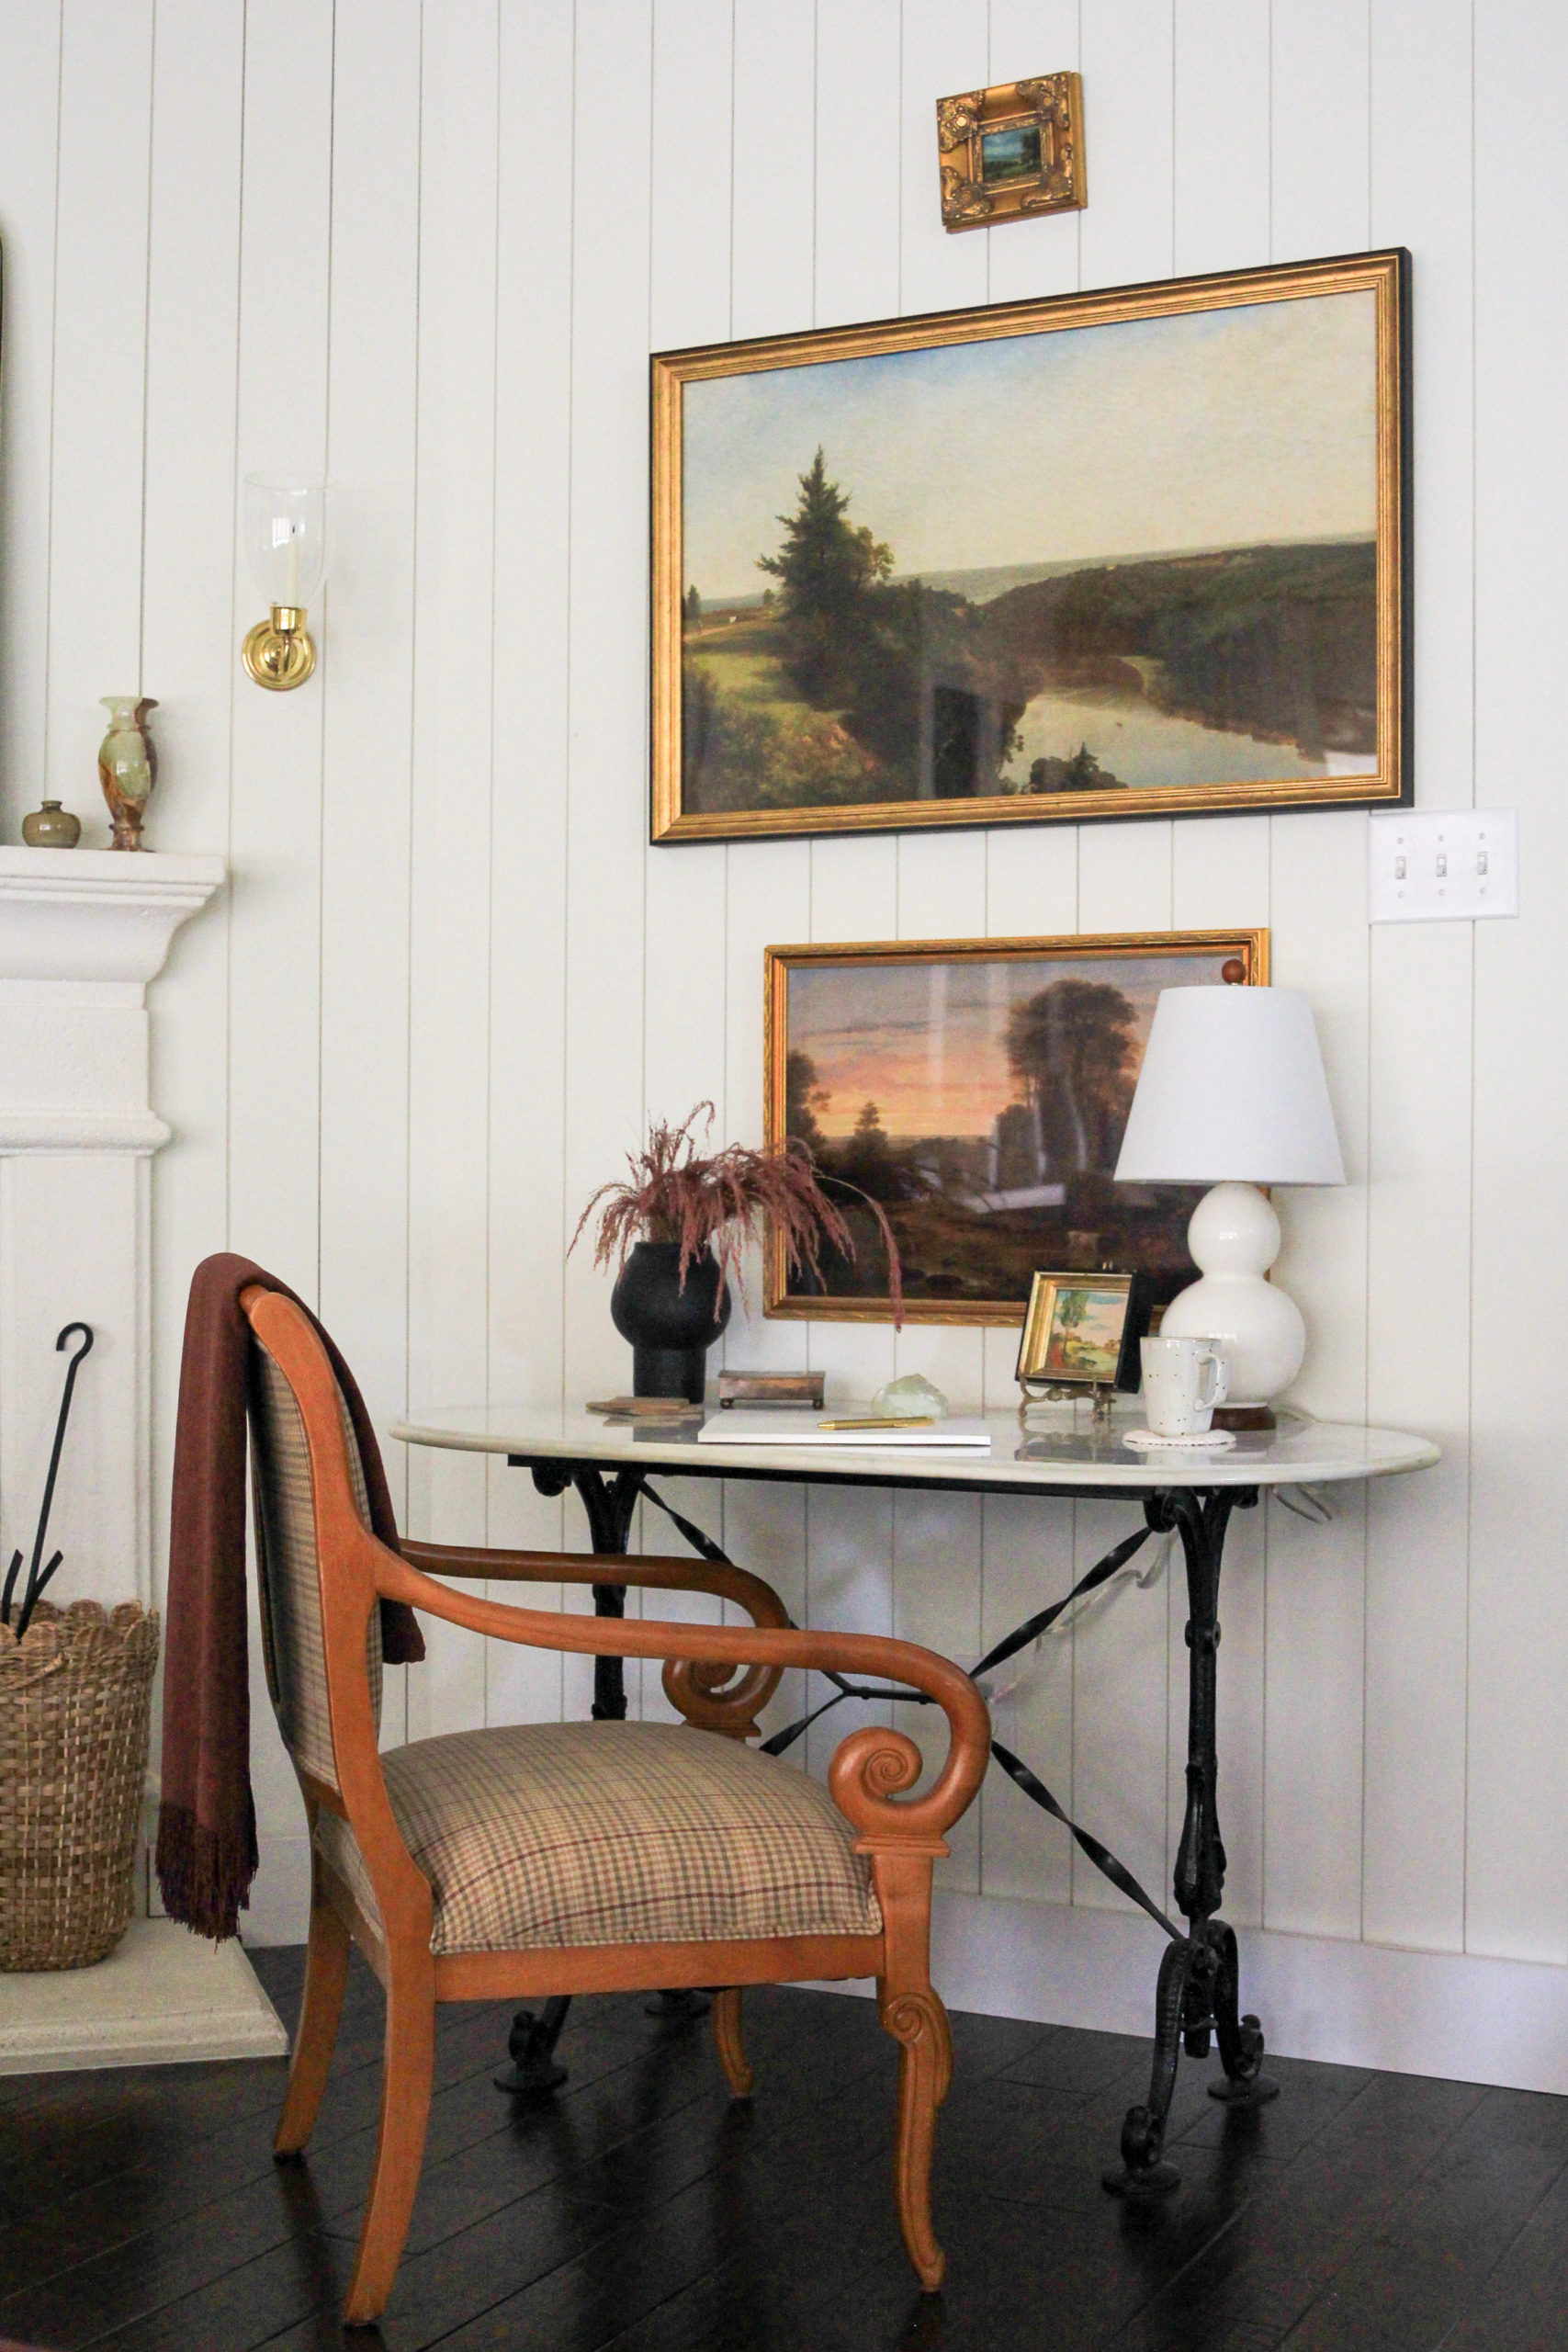 Living Room Work Station, Vintage Iron Based Marple Table as Desk, with Vinage Wooden Chair, Styoled with Ralph Lauren Lamp, and Vintage Looking Wall Art by Iris Nacole